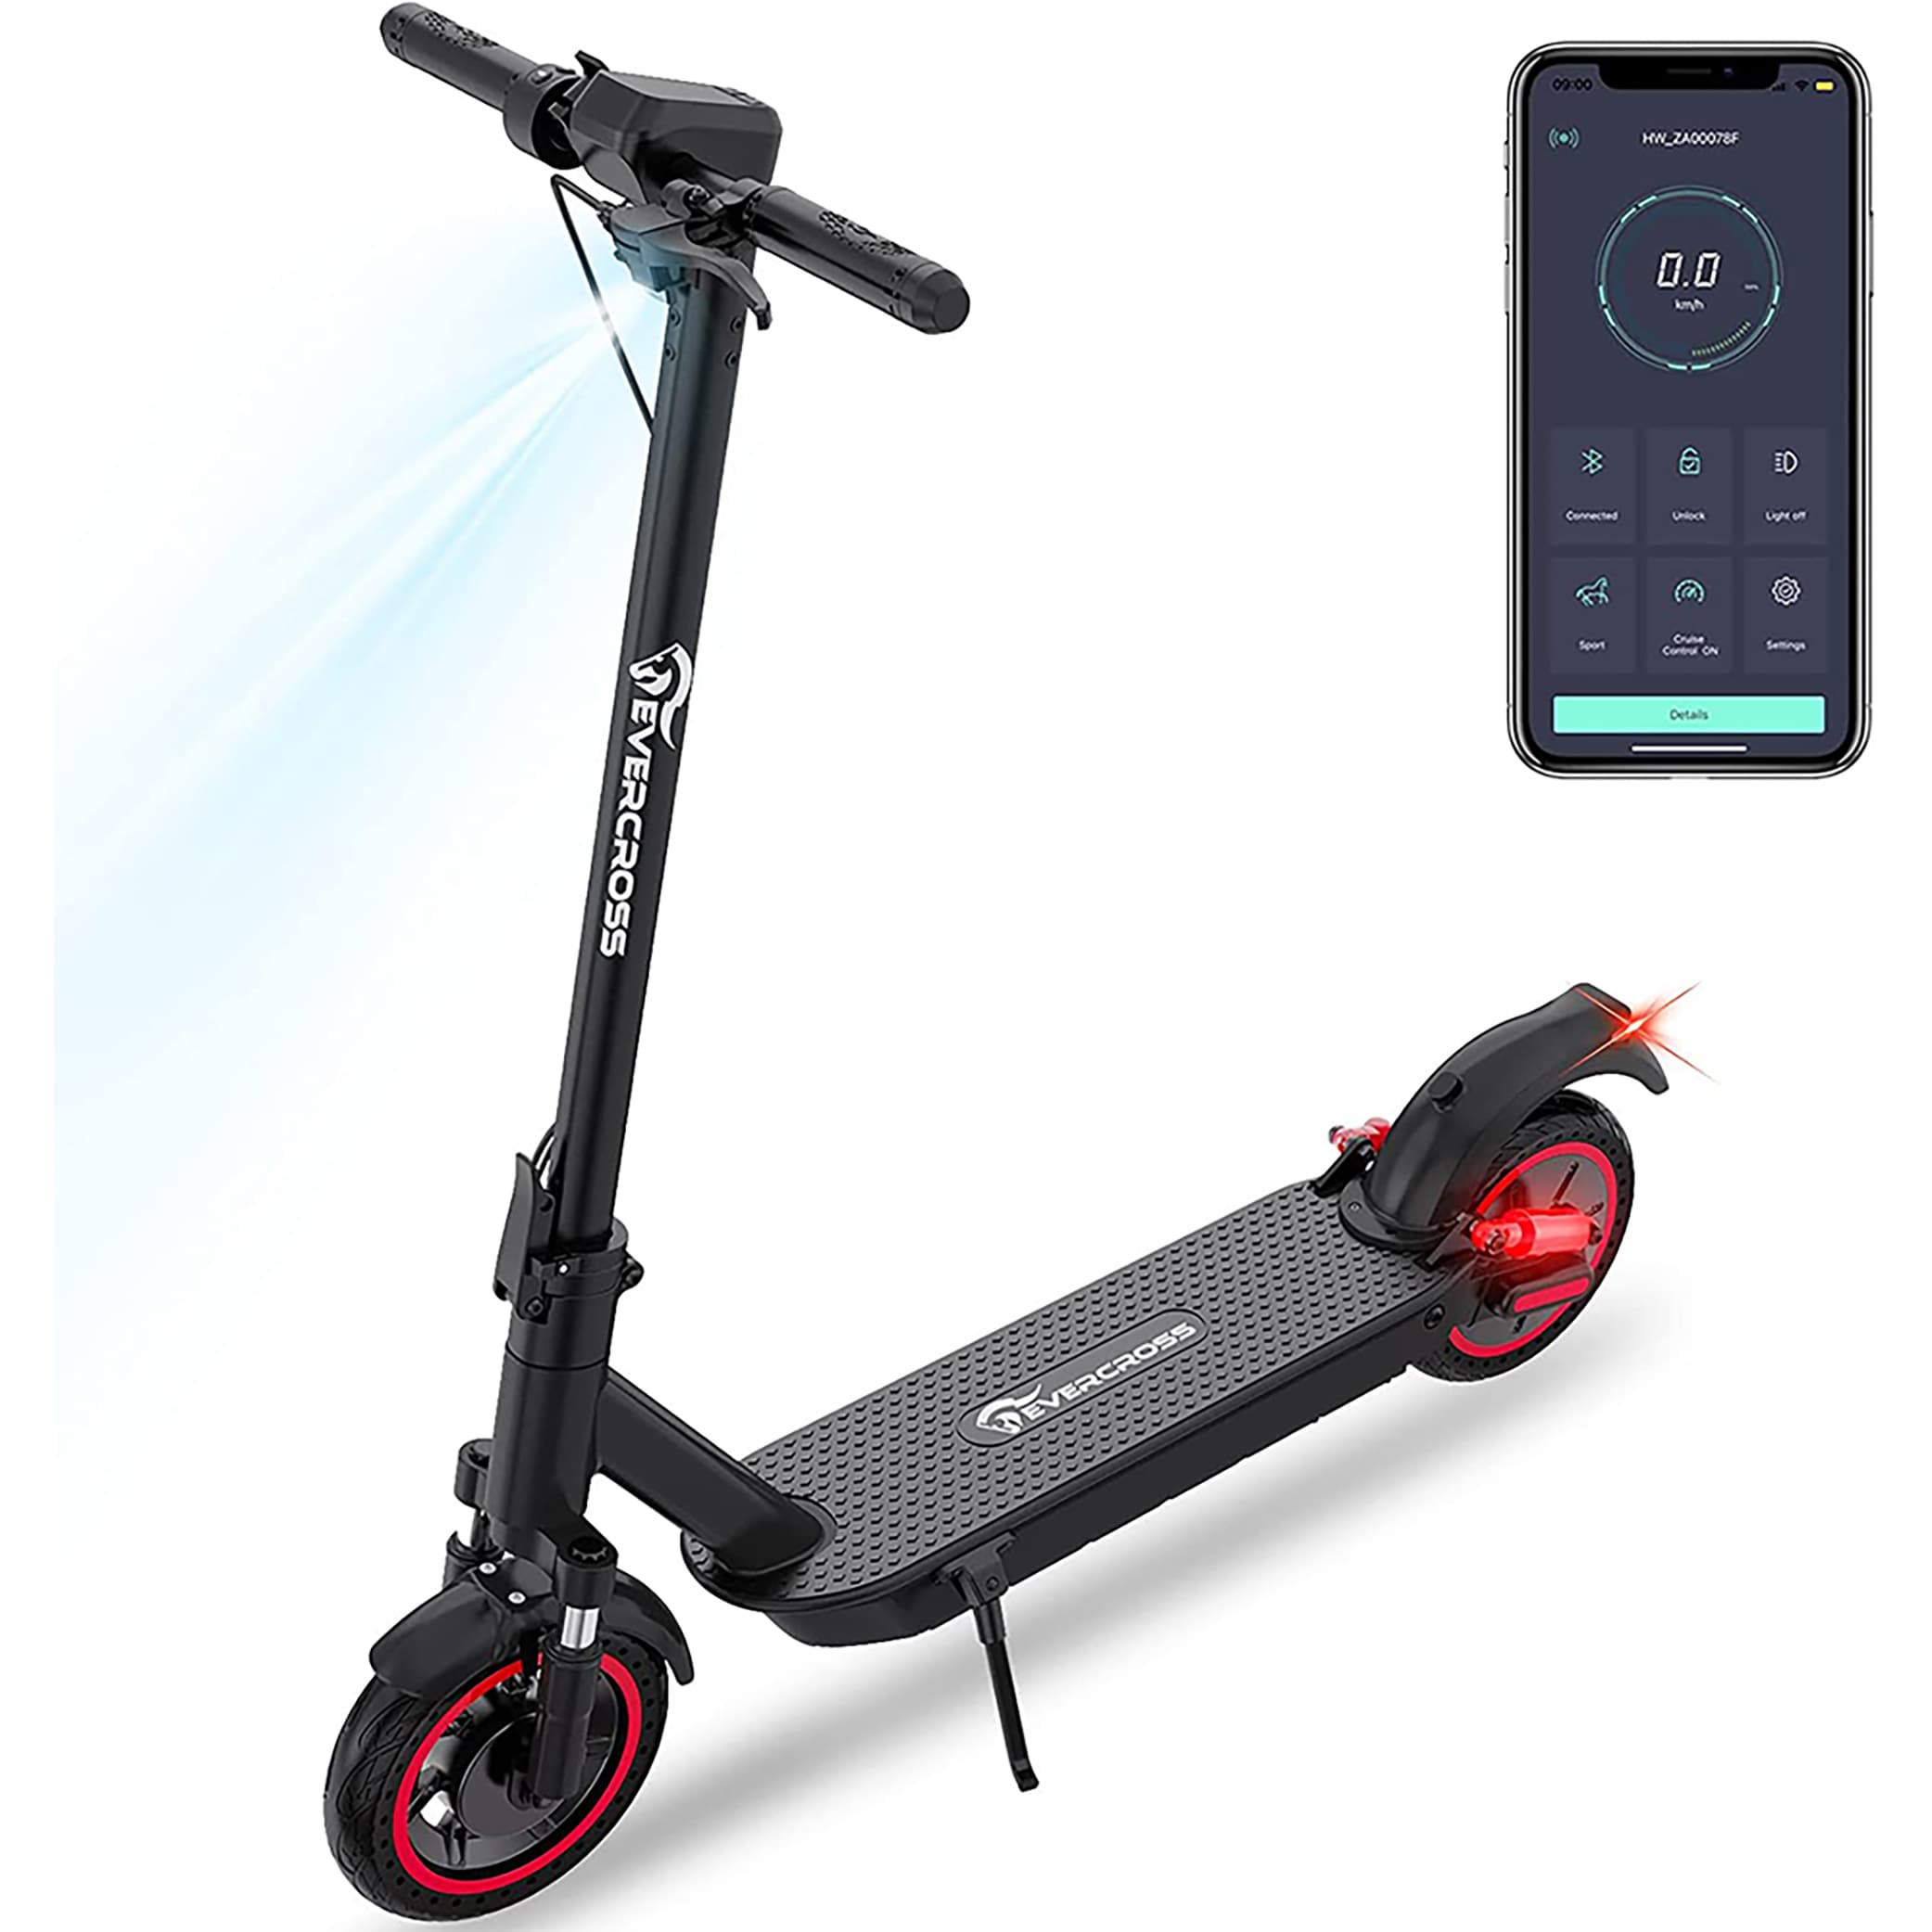 EVERCROSS EVERCROSS EV10K MAX Electric Scooter for Adults, Electric Scooter with Peak Power. in the at Lowes.com